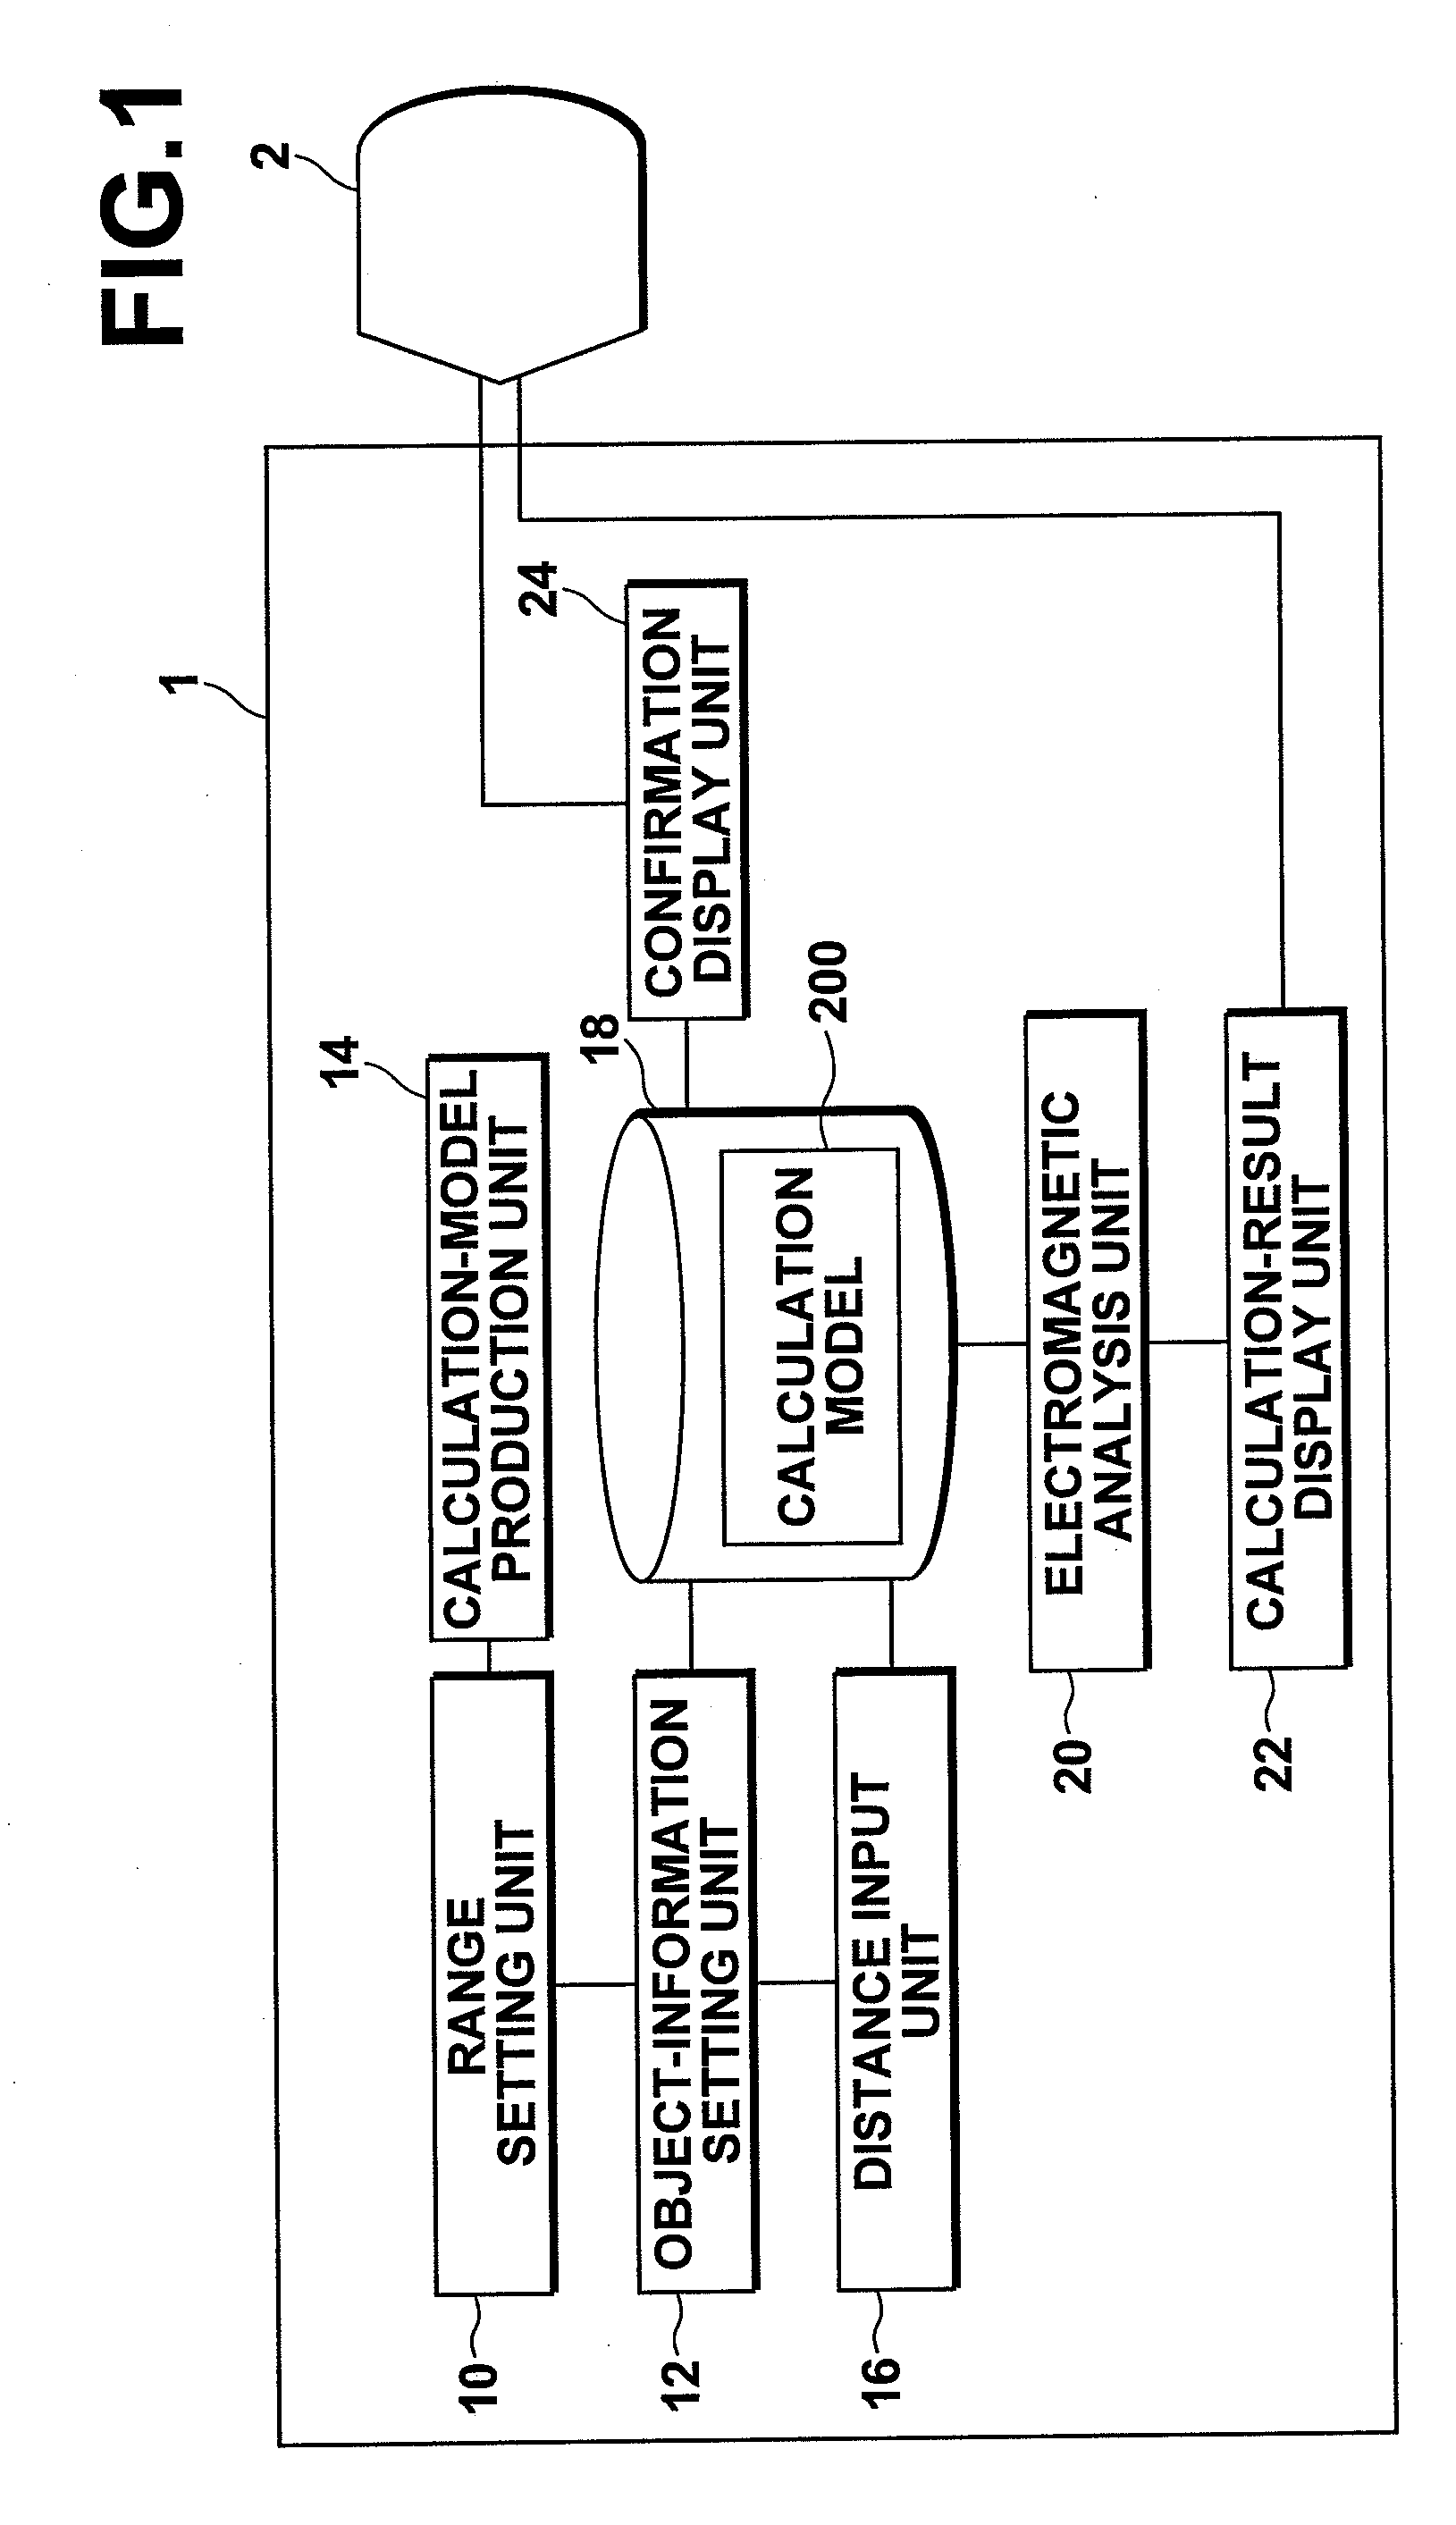 Apparatus and program for analyzing electromagnetic field